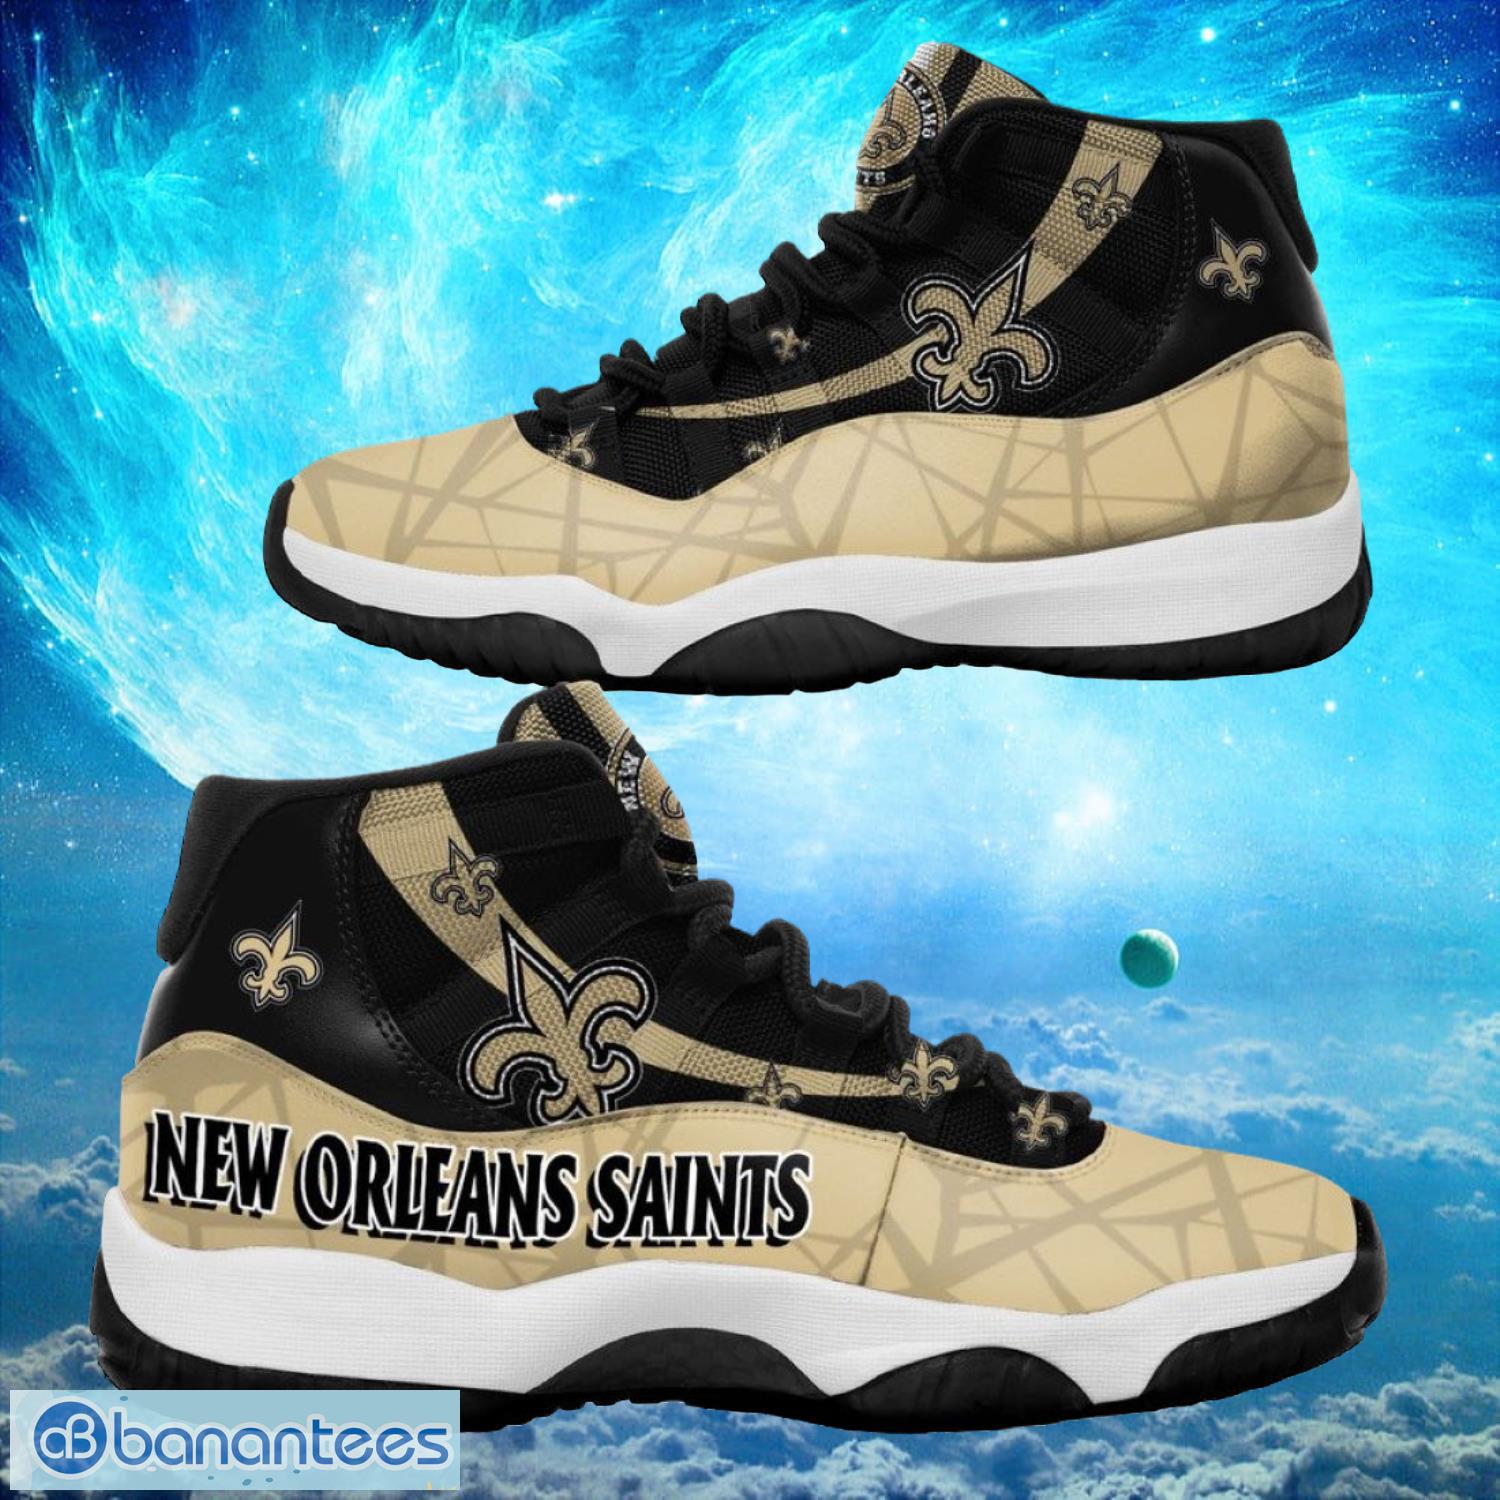 New Orleans Saints NFL Air Jordan 11 Sneakers Shoes Gift For Fans Product Photo 1